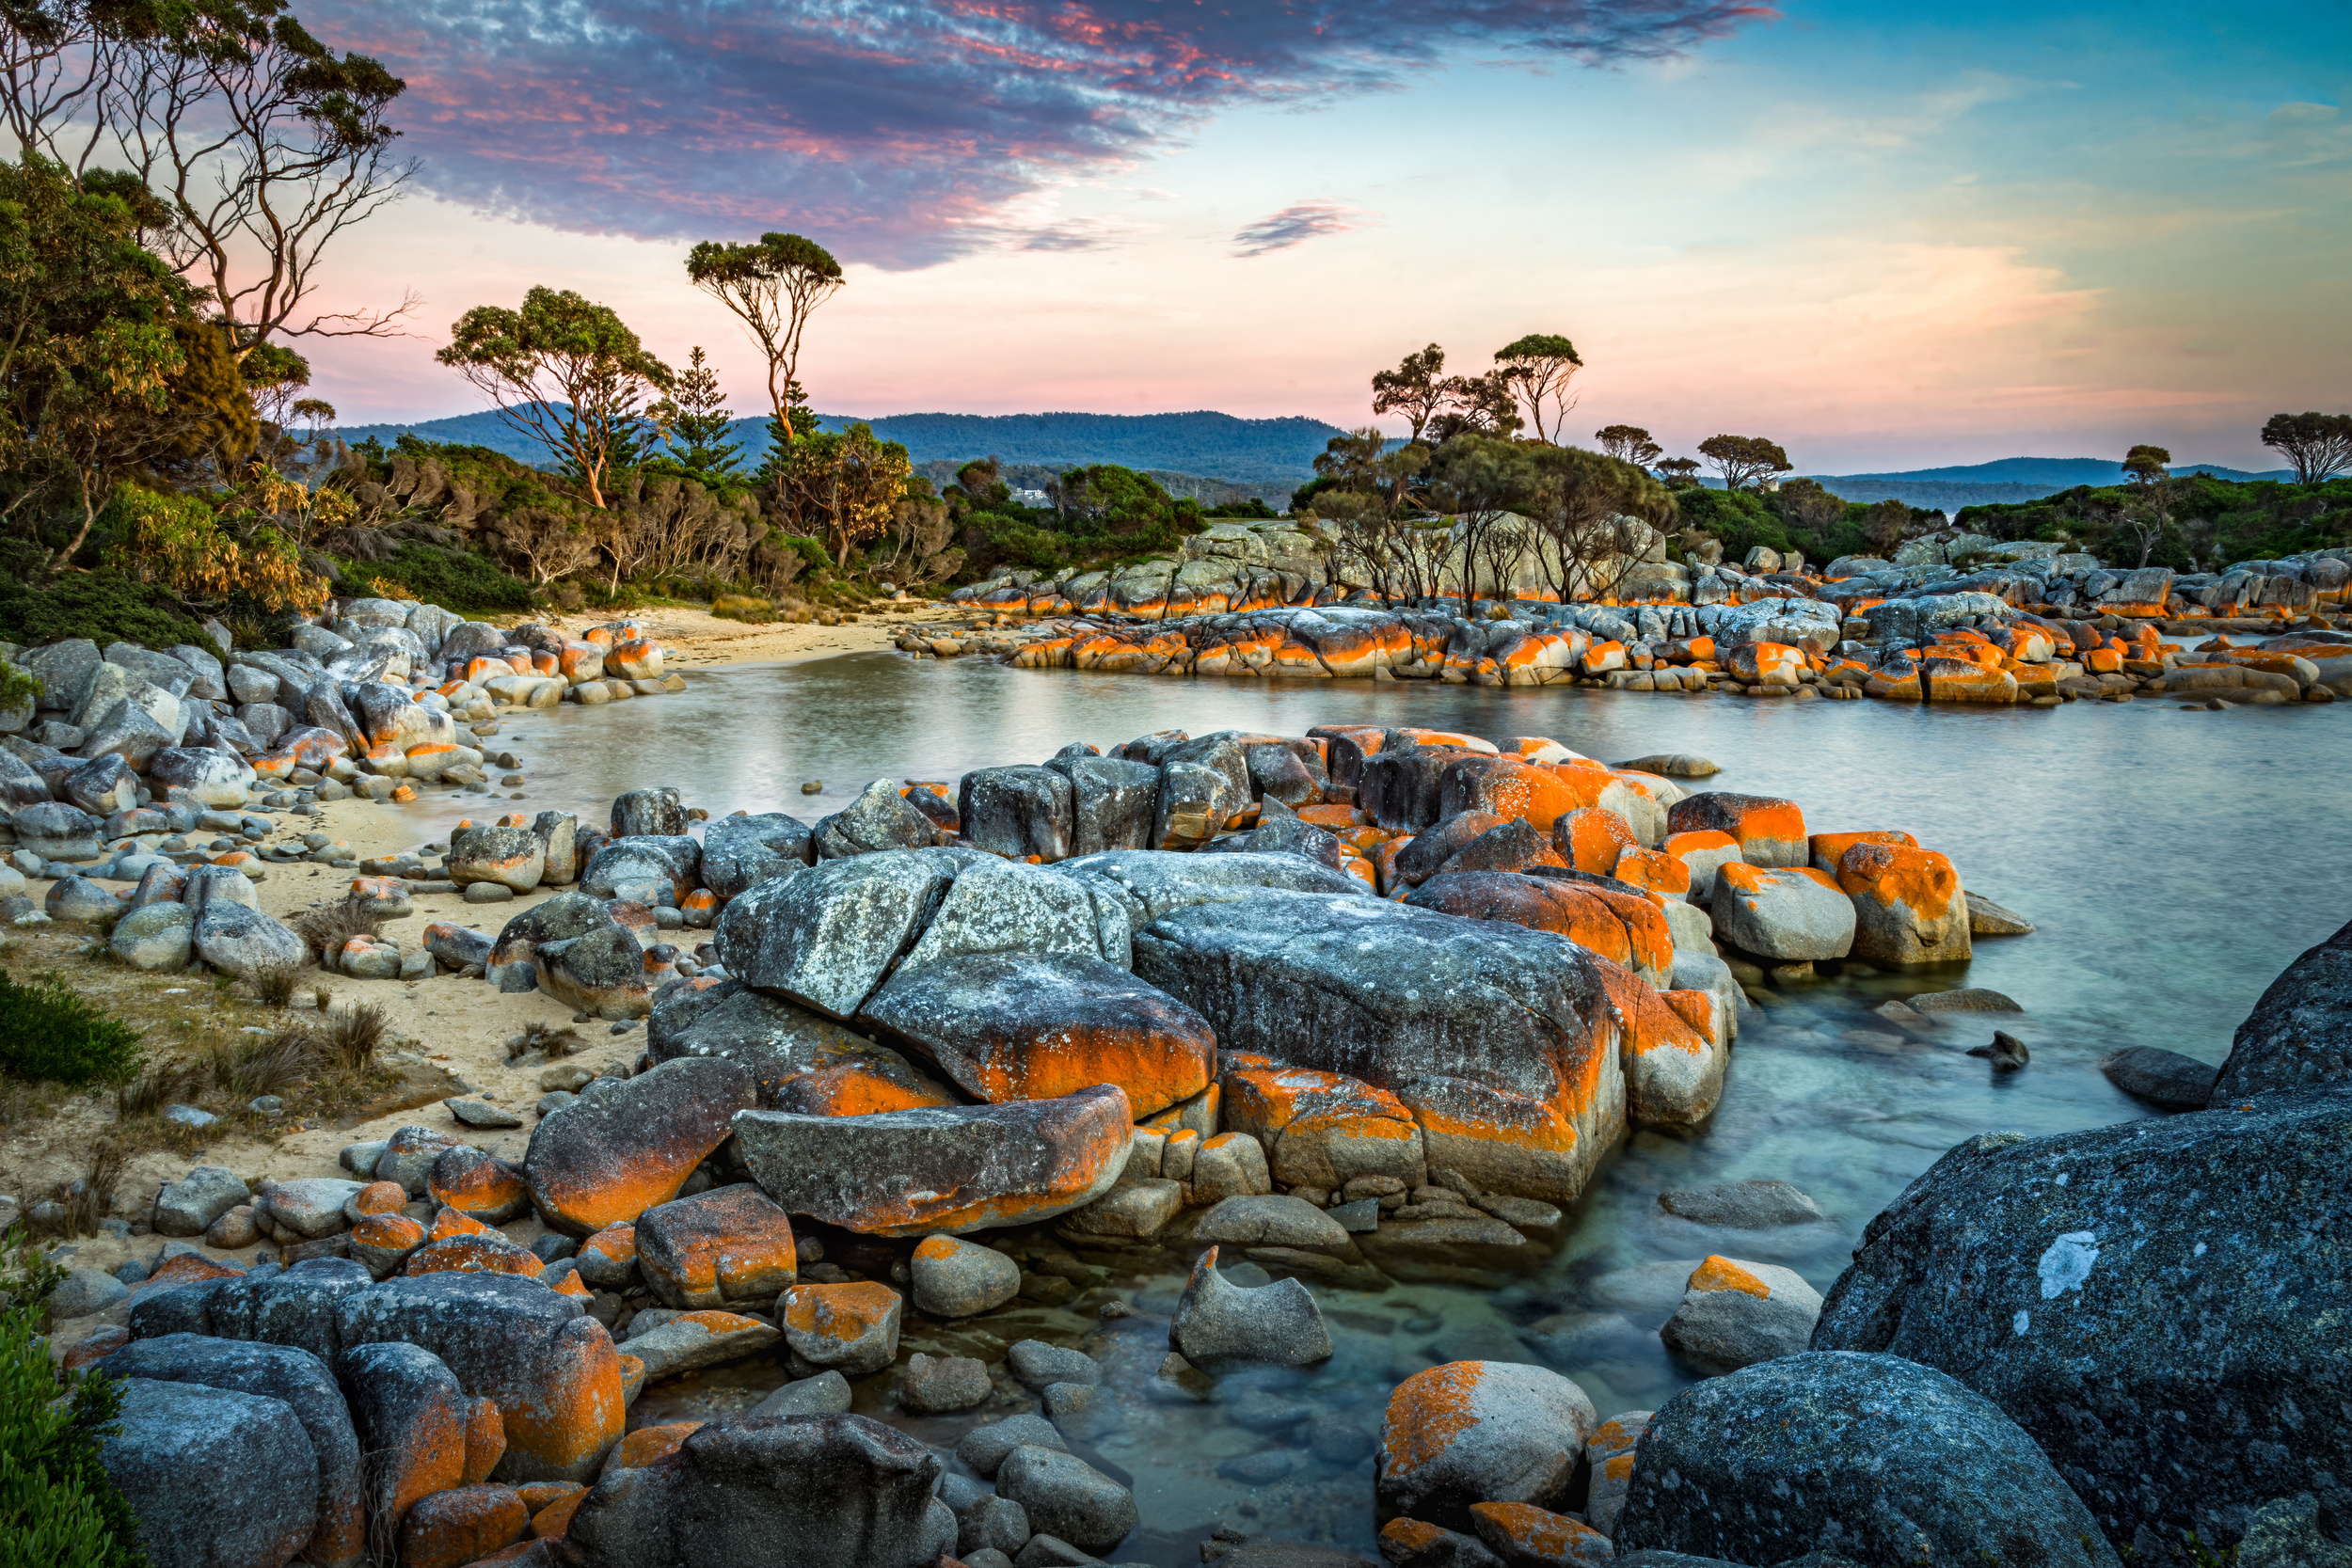 <p>Tasmania, Australia might sound like a made-up place and look like a made-up place, but luckily, it’s totally real. The beautiful remote island has a mixture of unique topographies and is a great place to see the Southern Lights. </p><p>You may also like: <a href='https://www.yardbarker.com/lifestyle/articles/25_gameday_snacks_you_can_make_in_a_slow_cooker/s1__22916233'>25 gameday snacks you can make in a slow cooker</a></p>